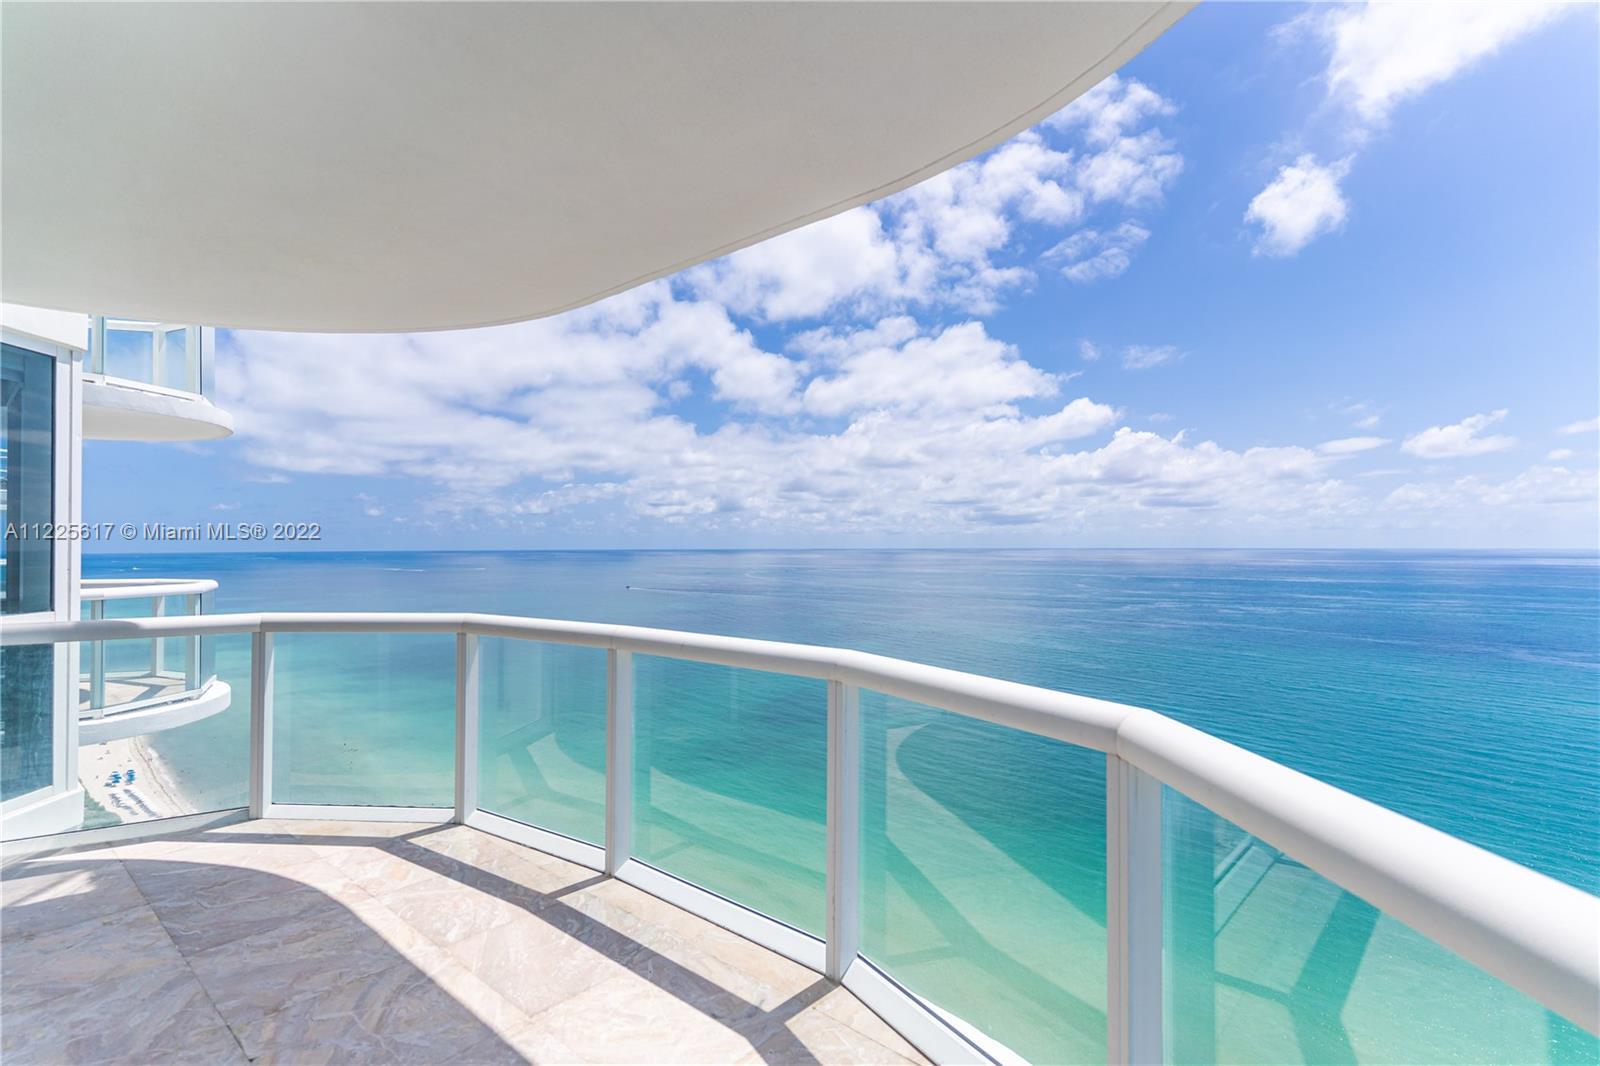 Experience striking unobstructed views of the Ocean, Miami Beach, and the Miami Skyline from this 33